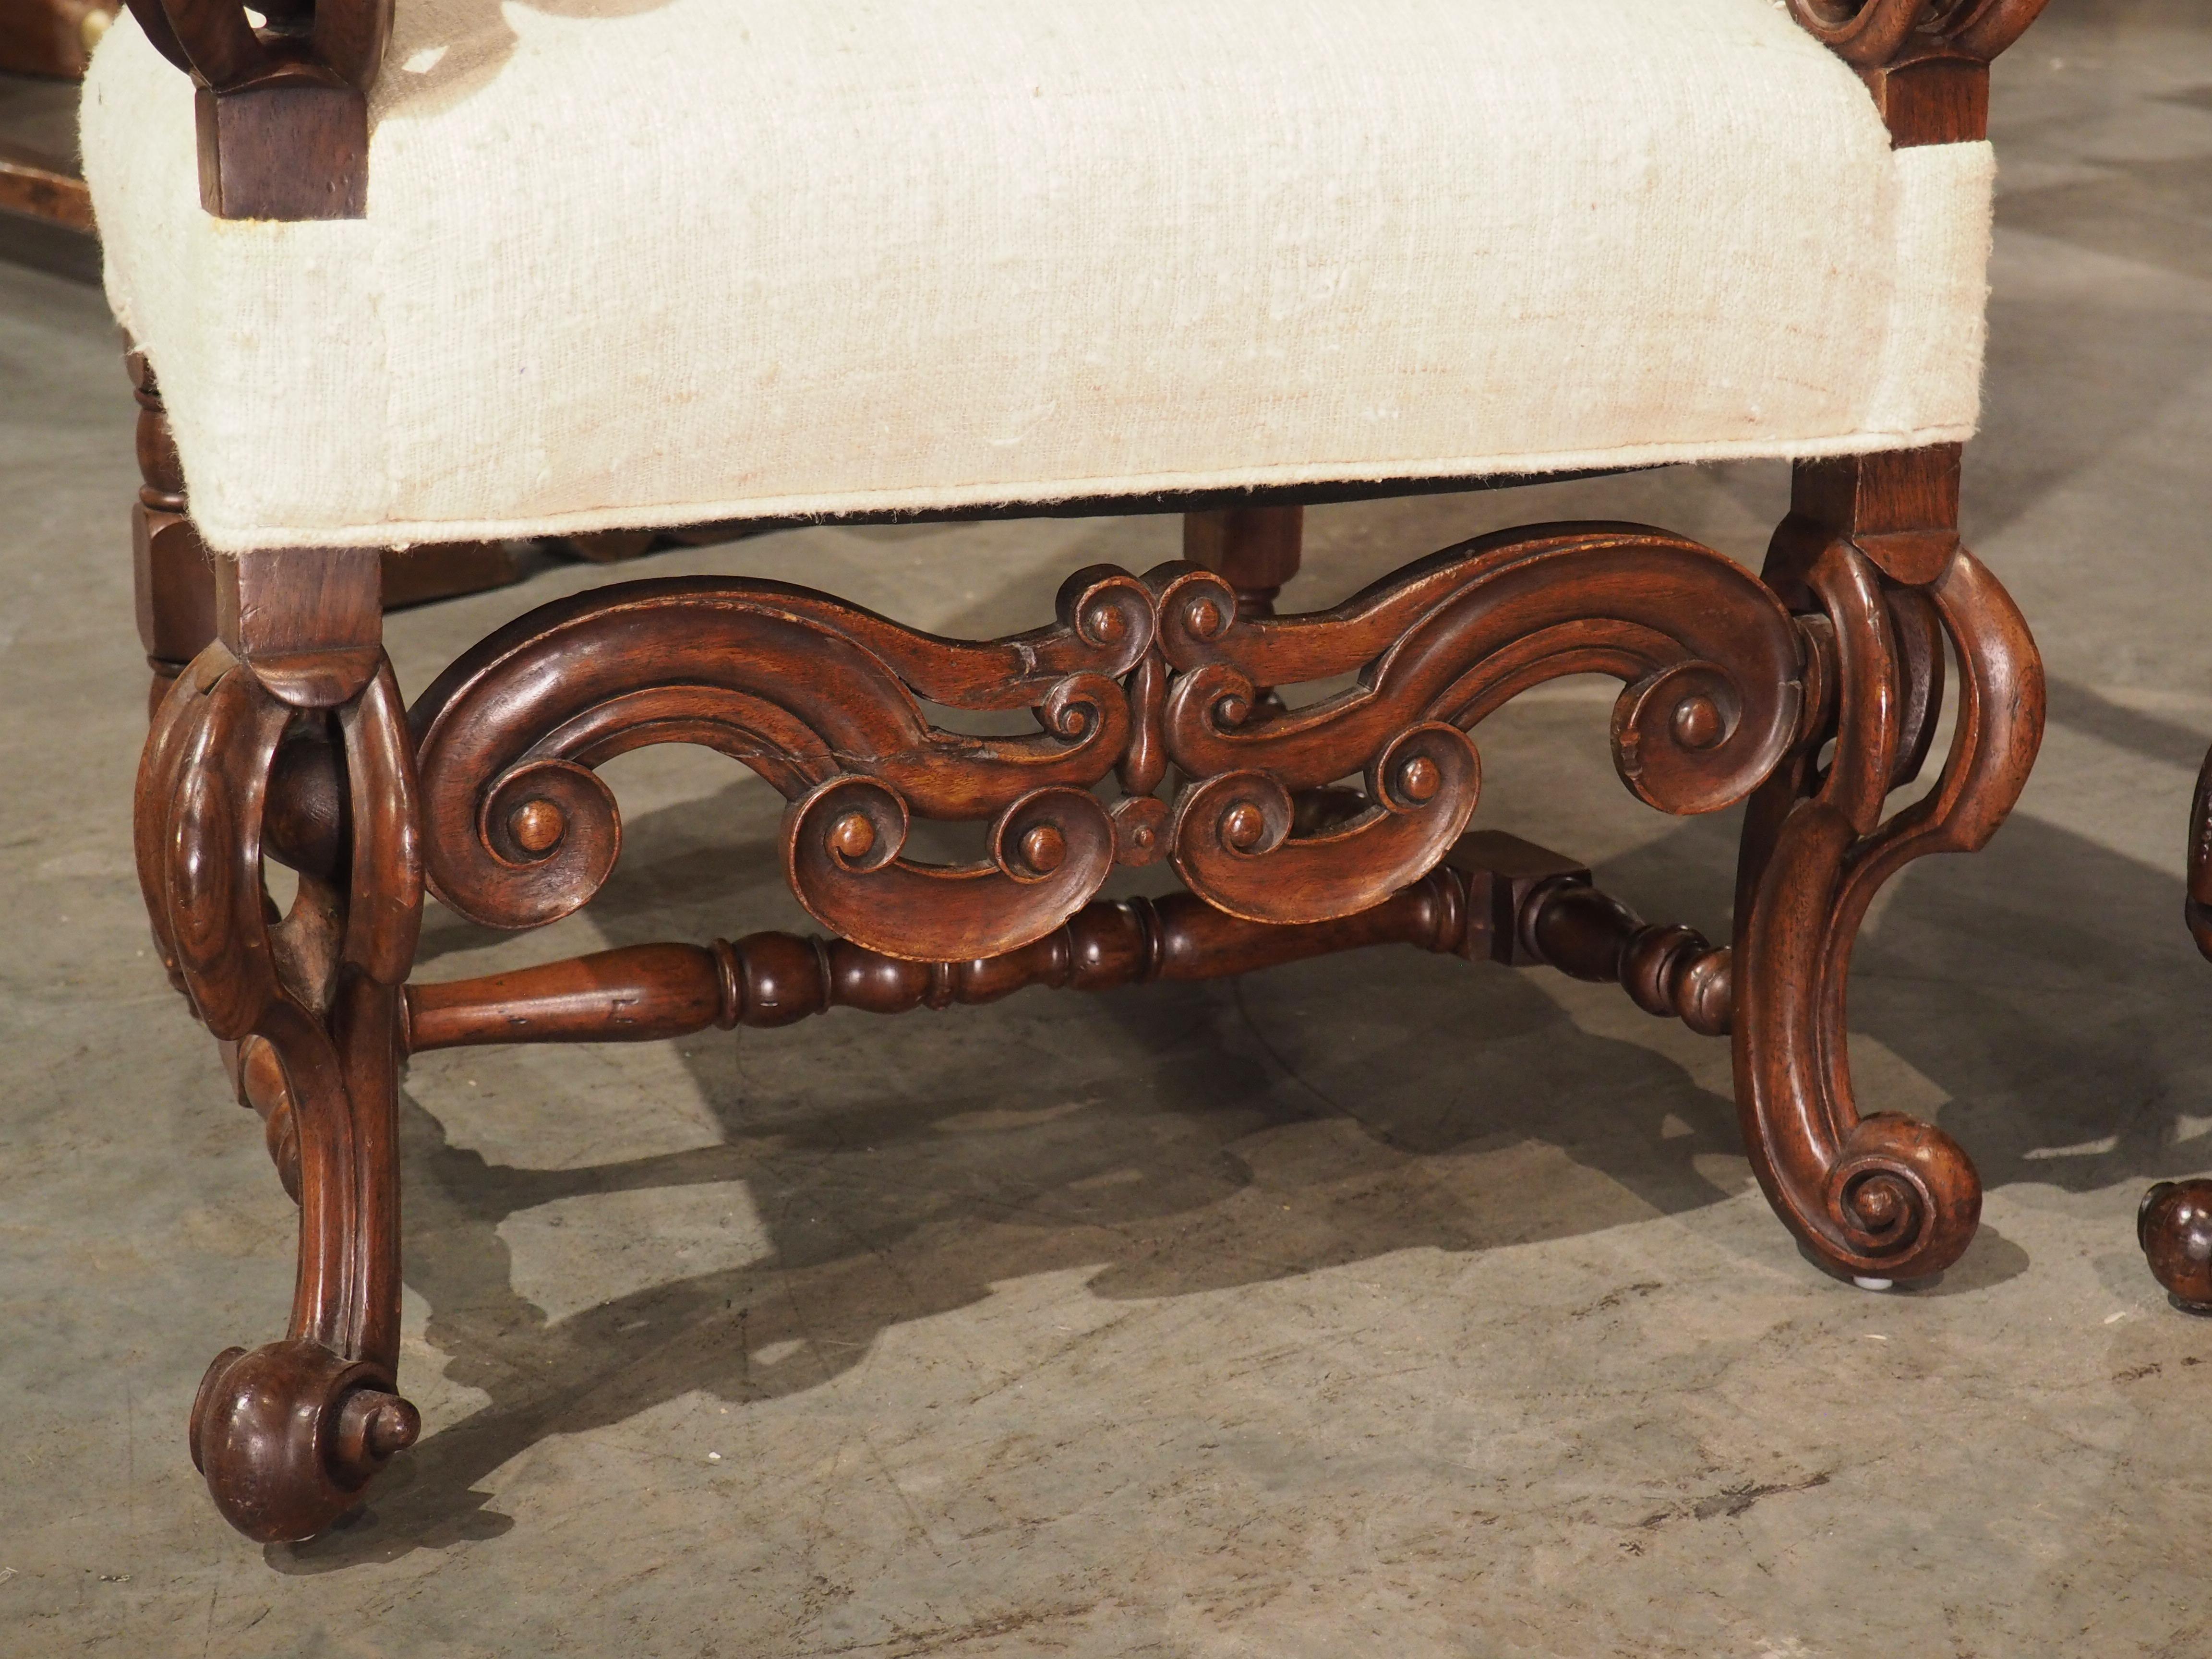 Hand-Carved Antique Italian Walnut Wood Armchair with Raw Silk Upholstery, circa 1890 For Sale